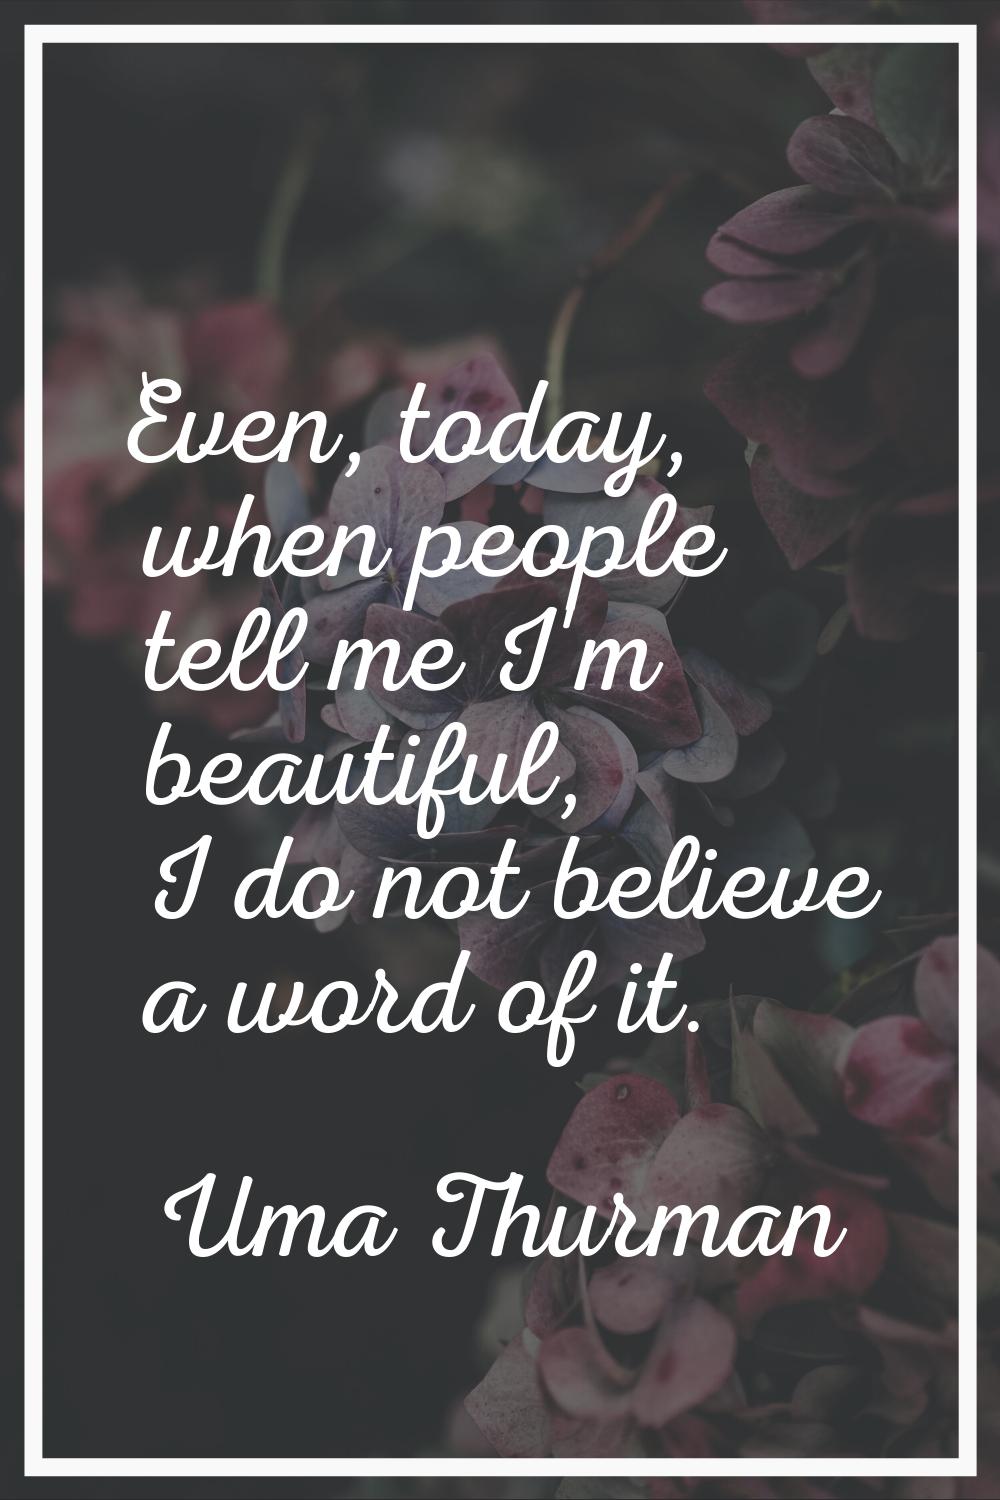 Even, today, when people tell me I'm beautiful, I do not believe a word of it.